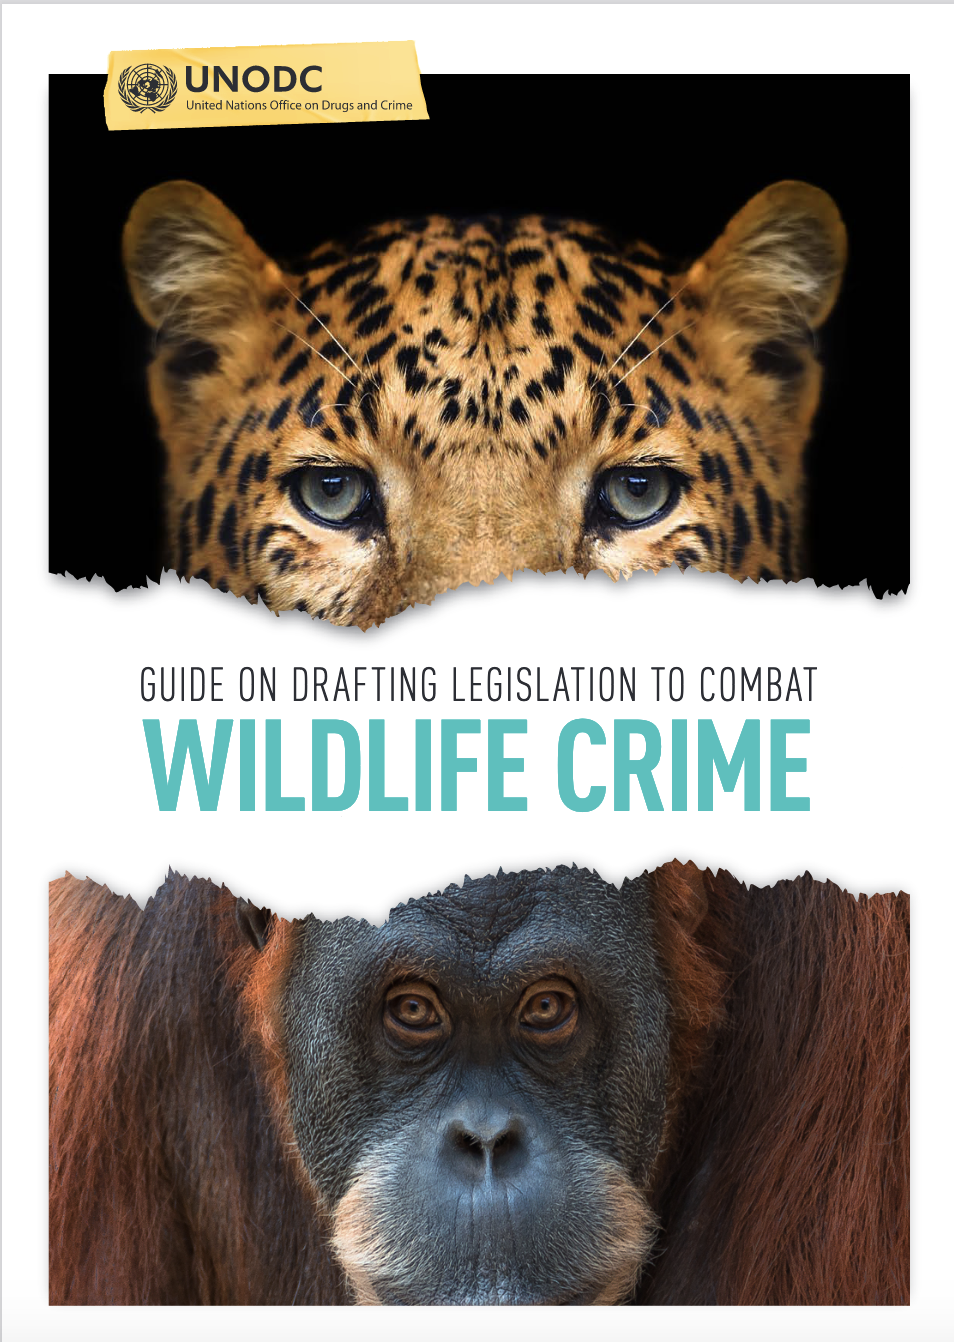 <div style="text-align:center"> </div>
<div style="text-align:center">Guide on drafting legislation to combat wildlife crime<br /> (<a href="https://www.unodc.org/documents/organized-crime/tools_and_publications/Wildlife_Crime_ebook.pdf">E</a> - <a href="https://www.unodc.org/documents/organized-crime/tools_and_publications/Wildelife-Crime_ebook_F.pdf">F</a> - <a href="https://www.unodc.org/documents/Wildlife/Legislative_Guide_PT.pdf"><em>Portuguese</em></a>)</div>